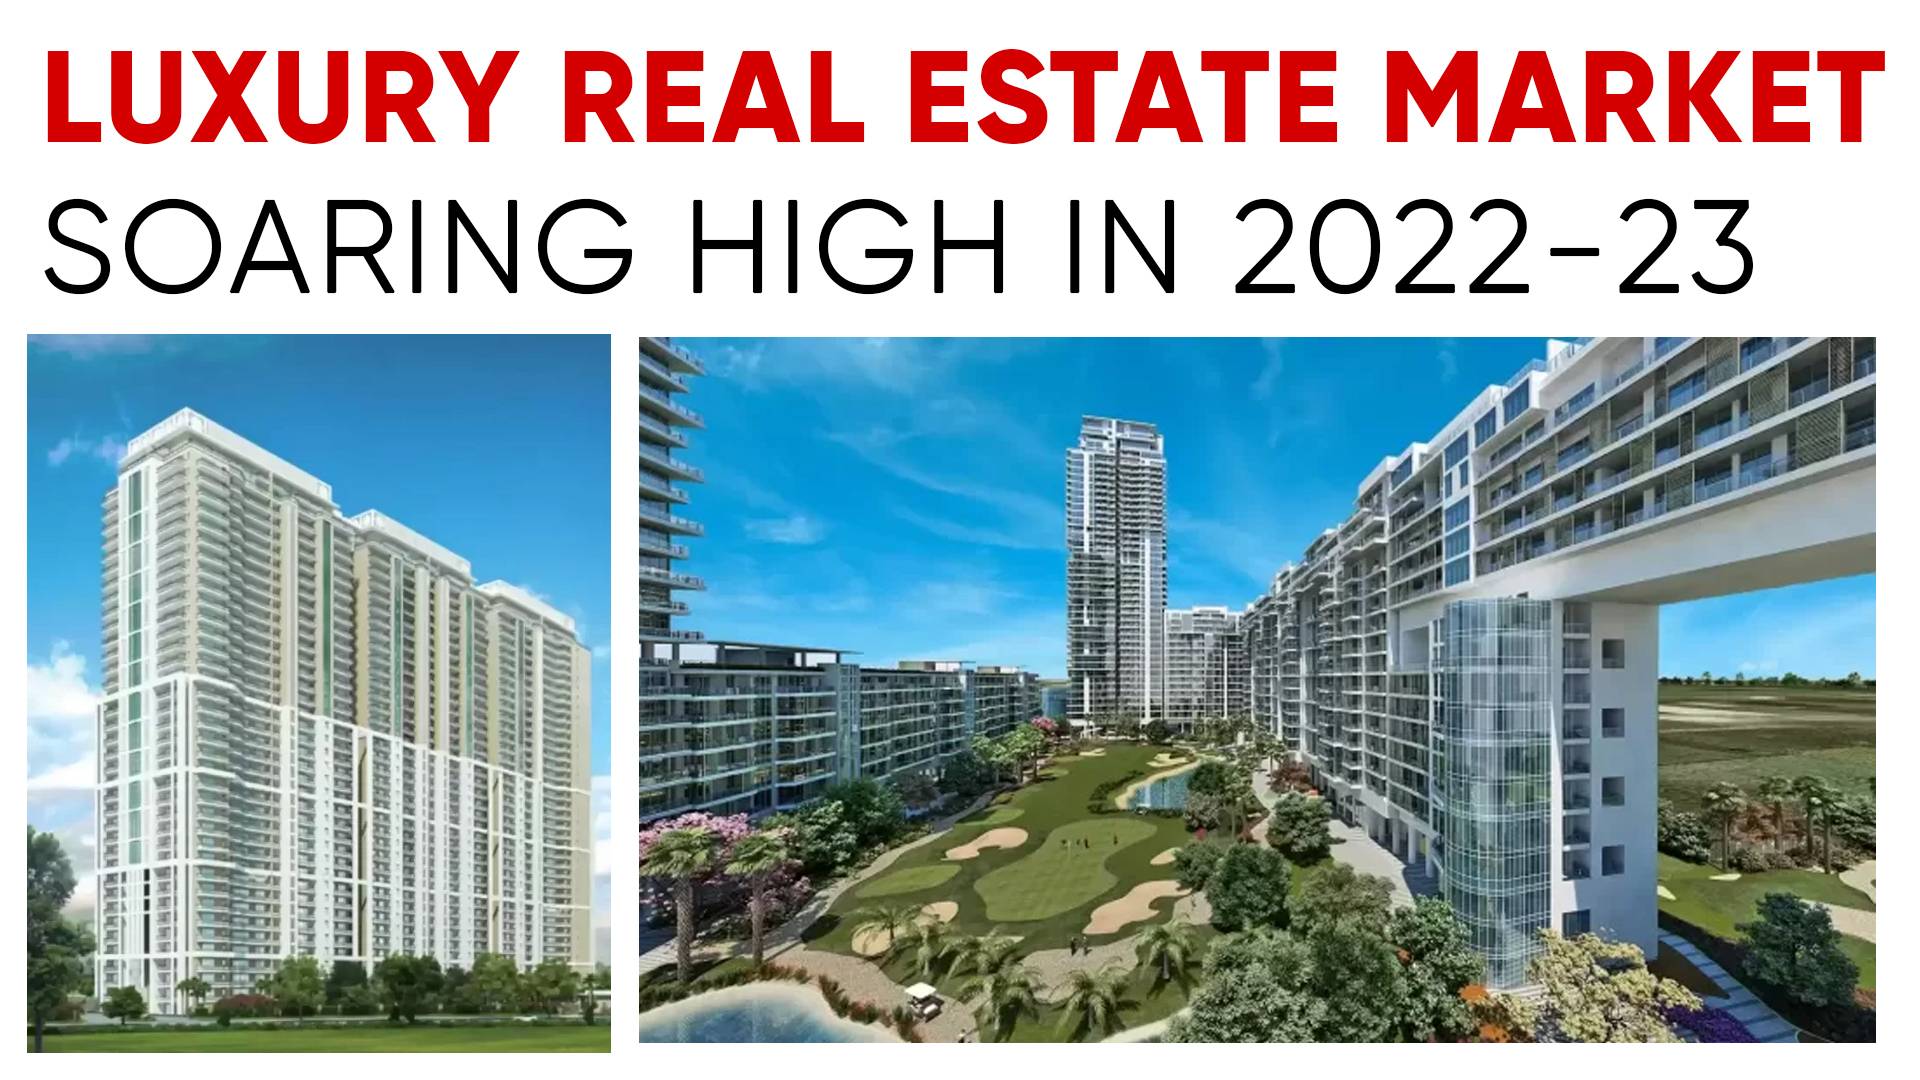 Luxury Real Estate Market Soaring High in 2022-23